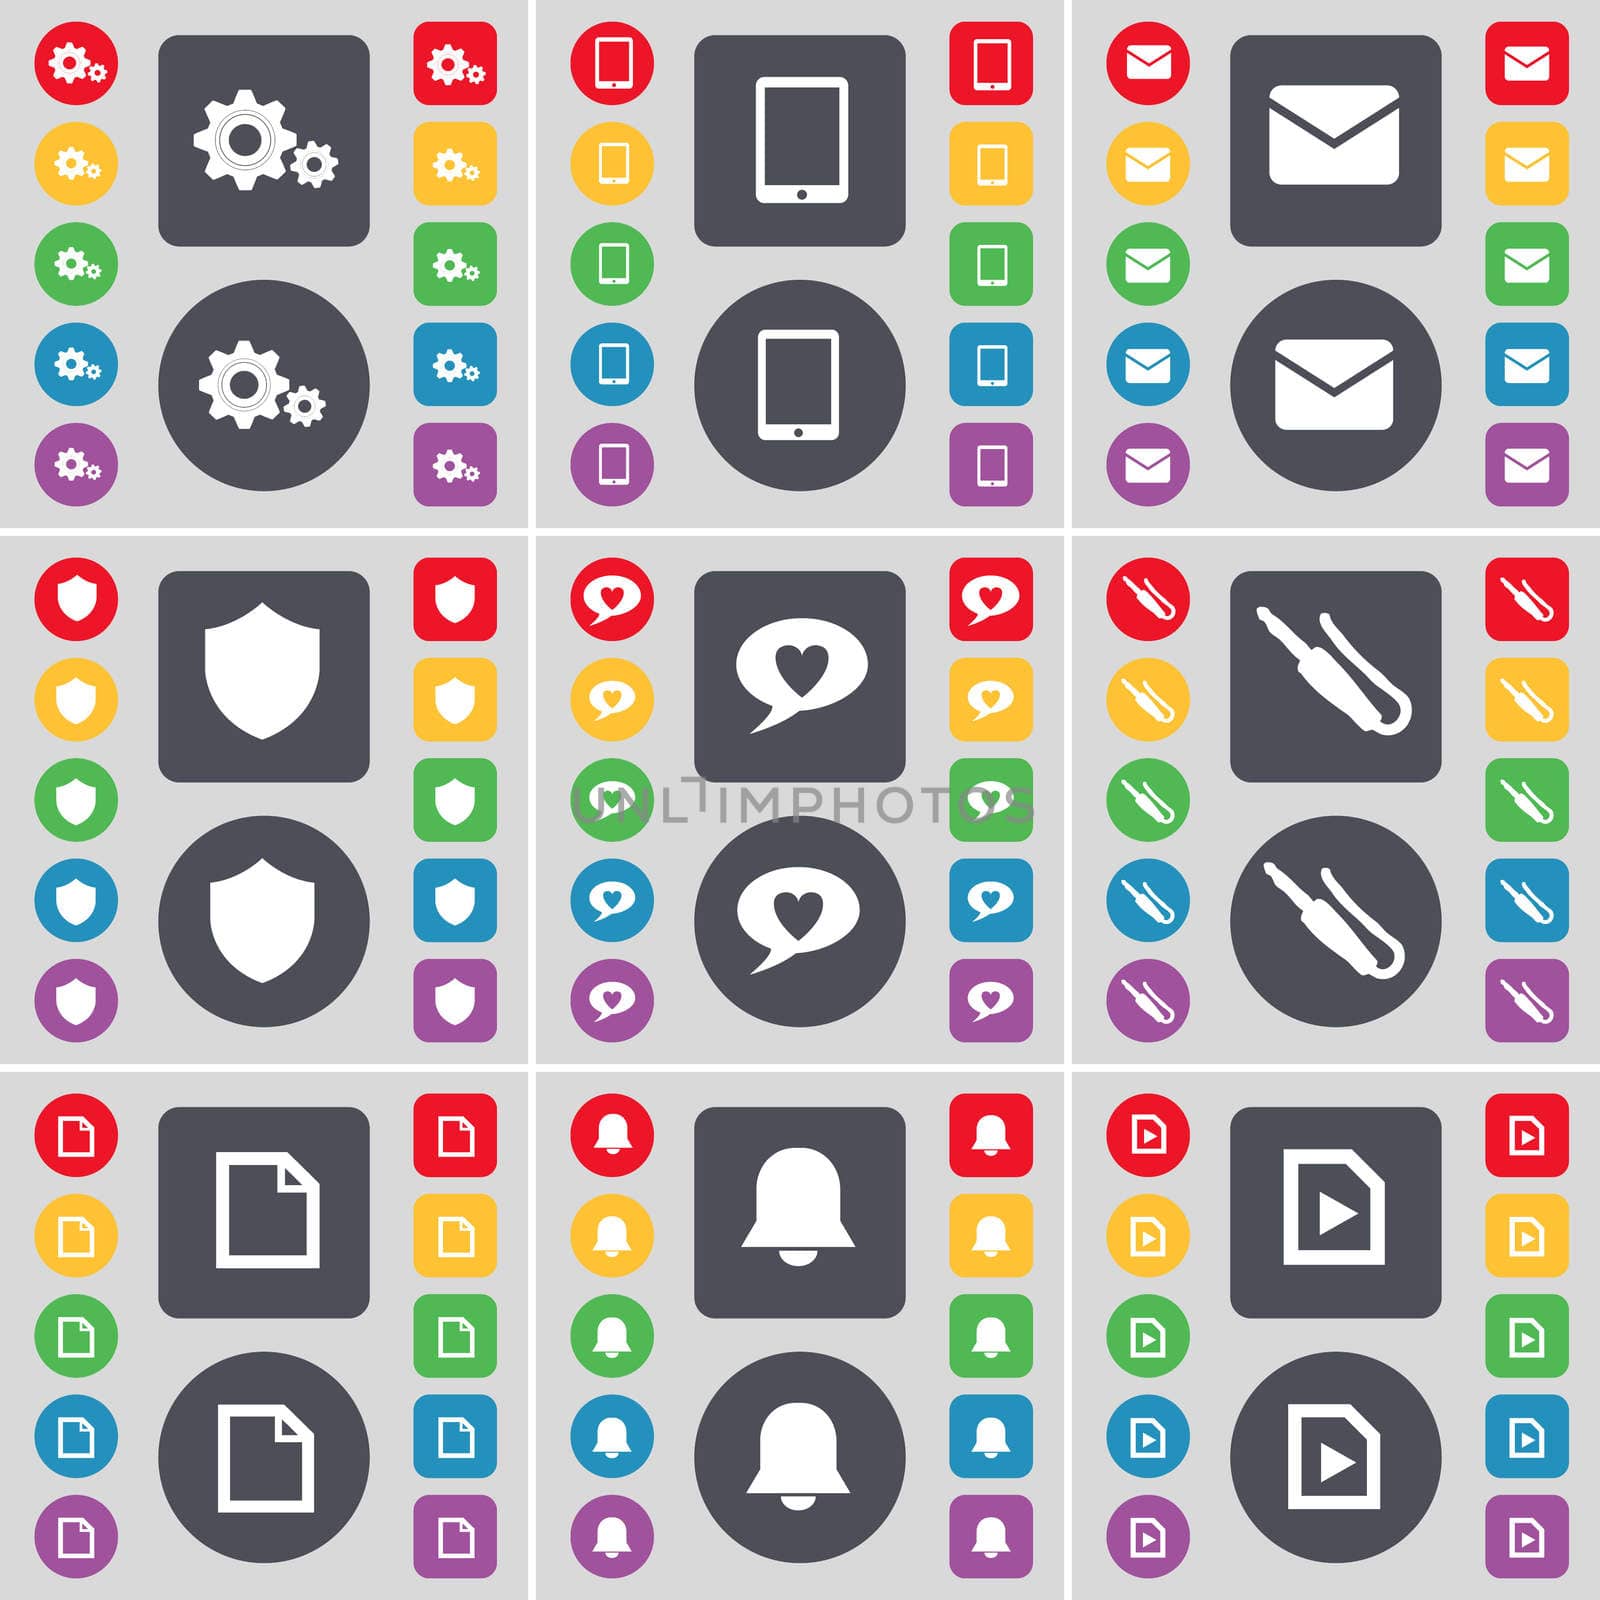 Gear, Tablet PC, Message, Badge, Chat bubble, Microphone connector, File, Notification, Music file icon symbol. A large set of flat, colored buttons for your design. illustration